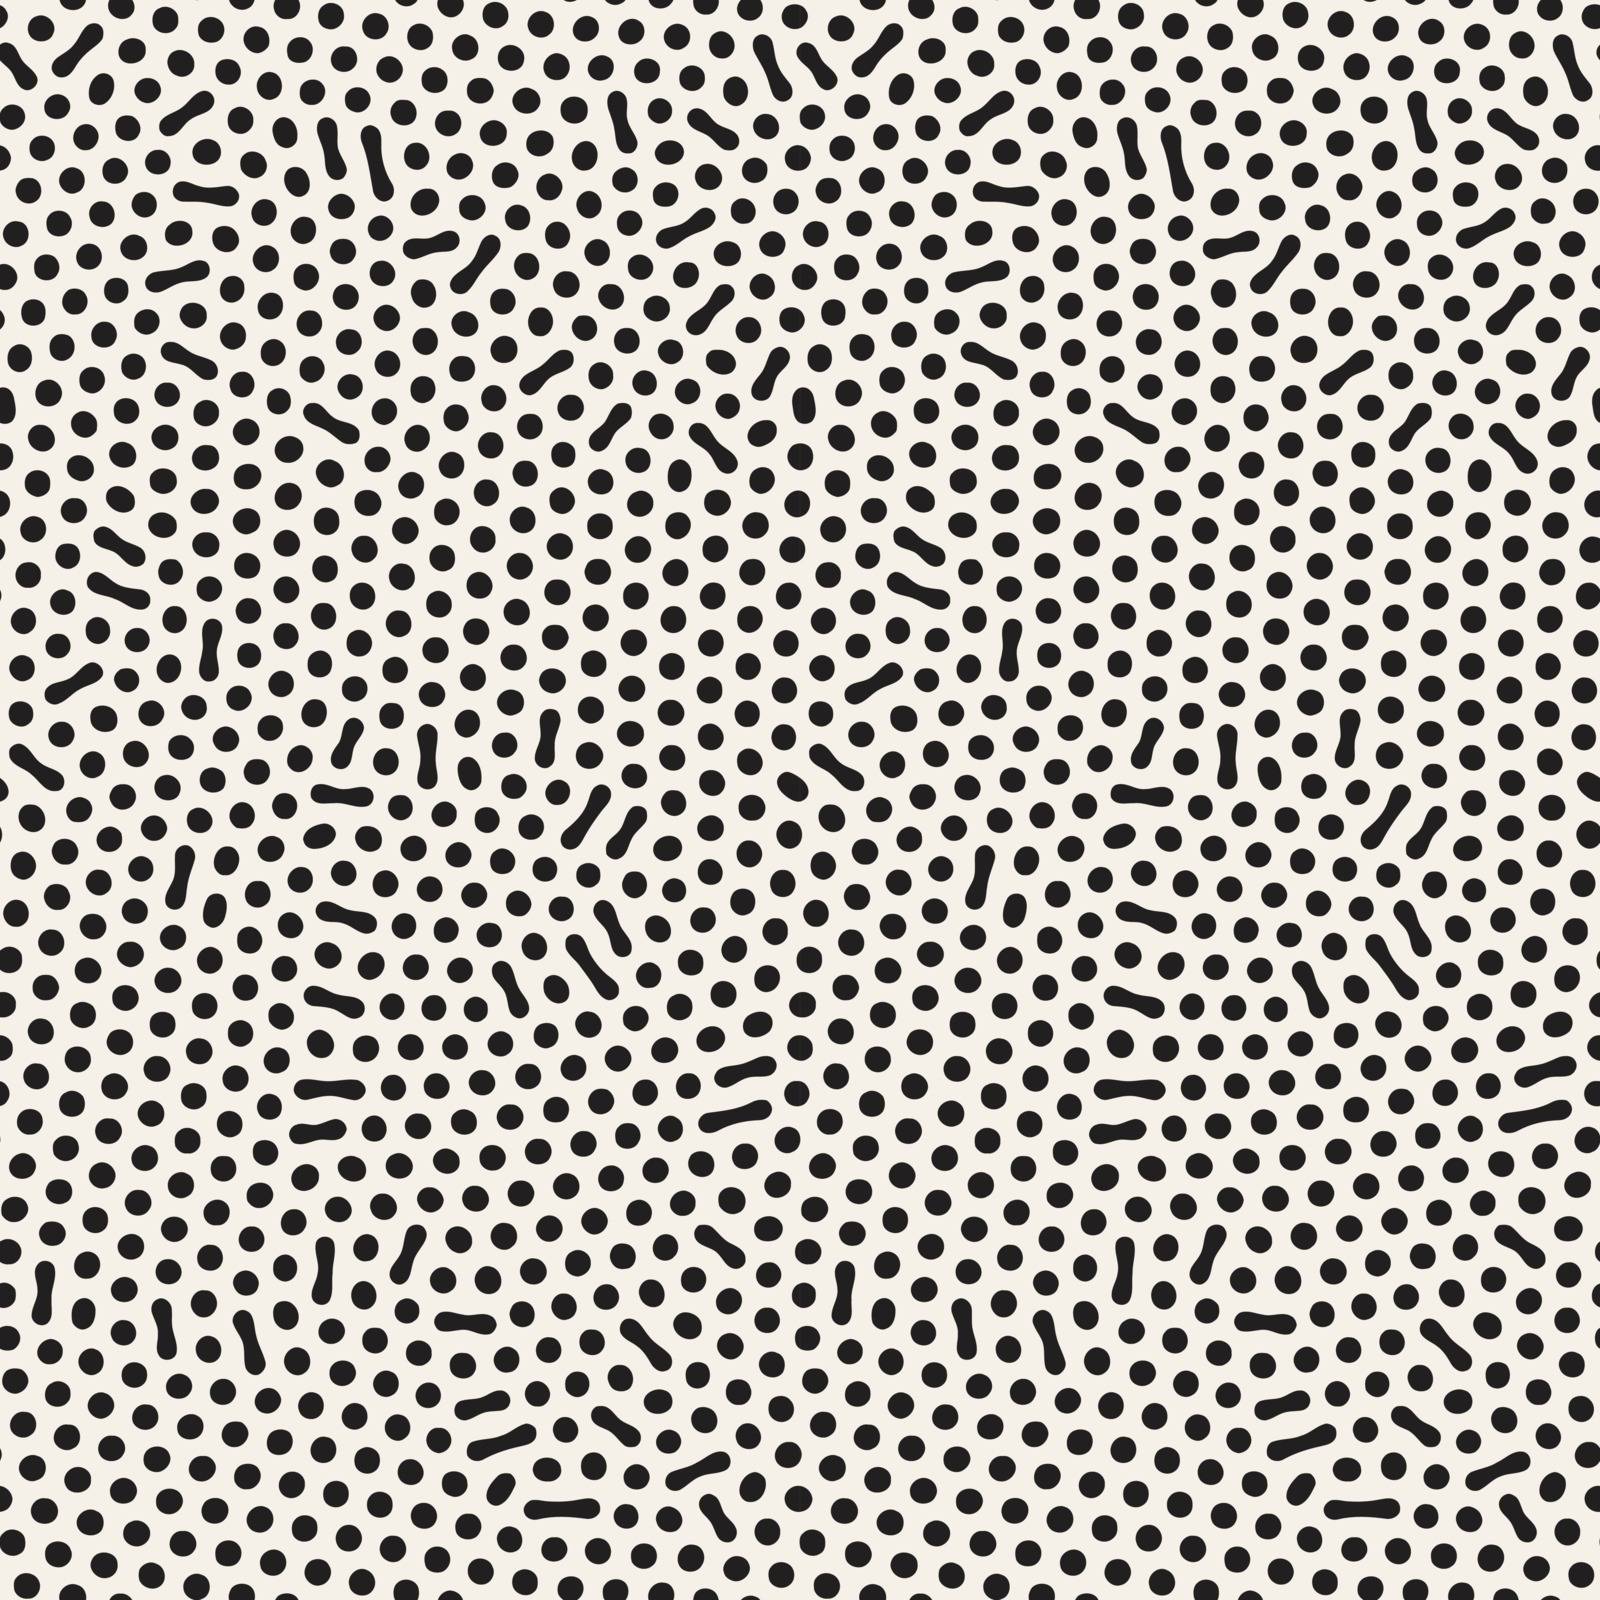 Organic Irregular Rounded Lines. Abstract Freehand Background Design. Vector Seamless Black and White Pattern.